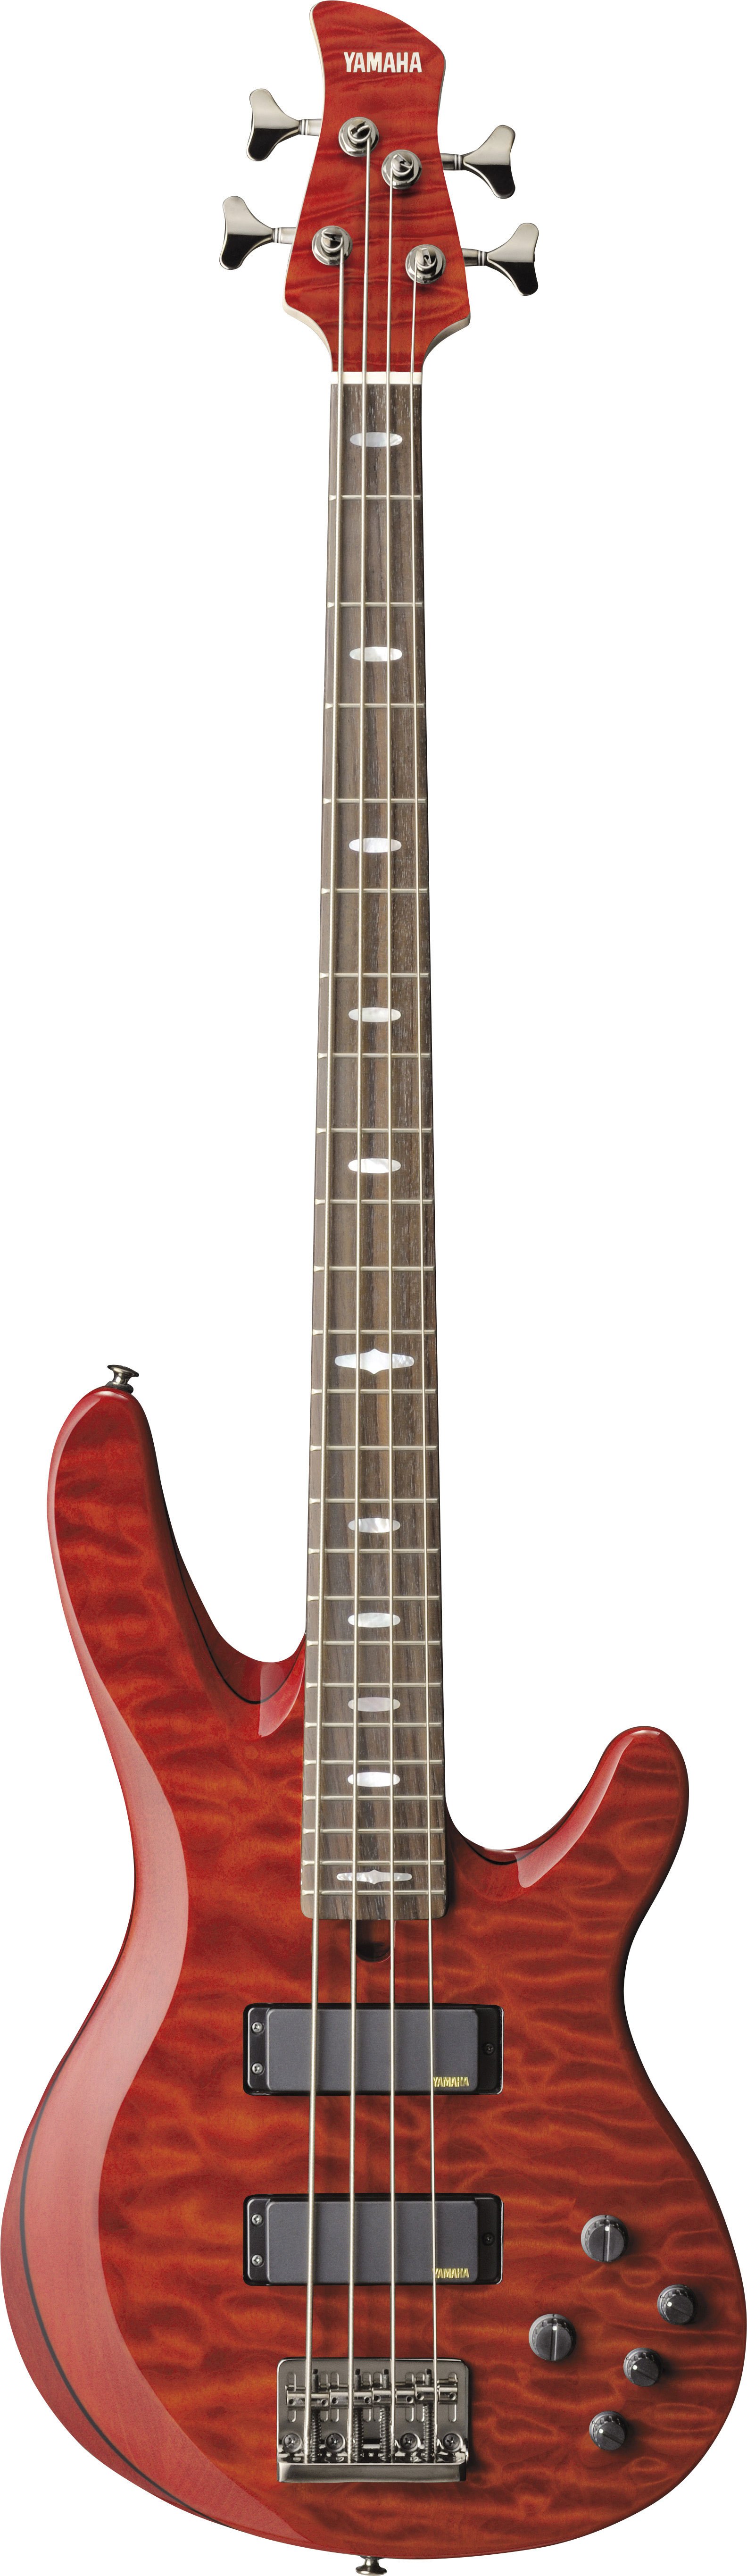 TRB - Overview - Electric Basses - Guitars, Basses, & Amps